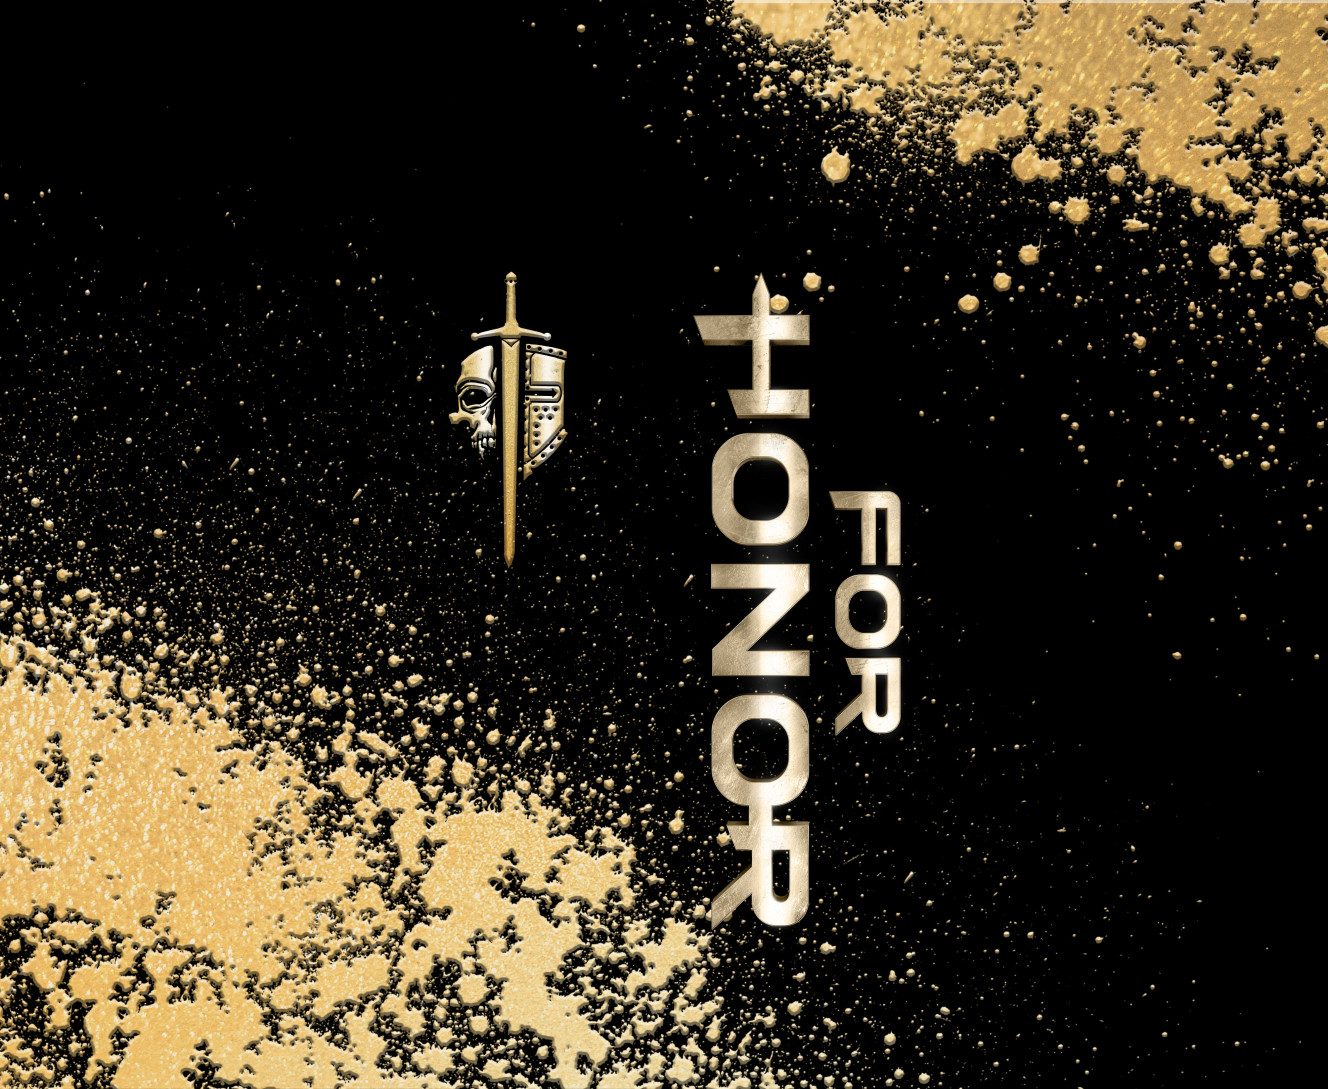 FOR HONOR [6]